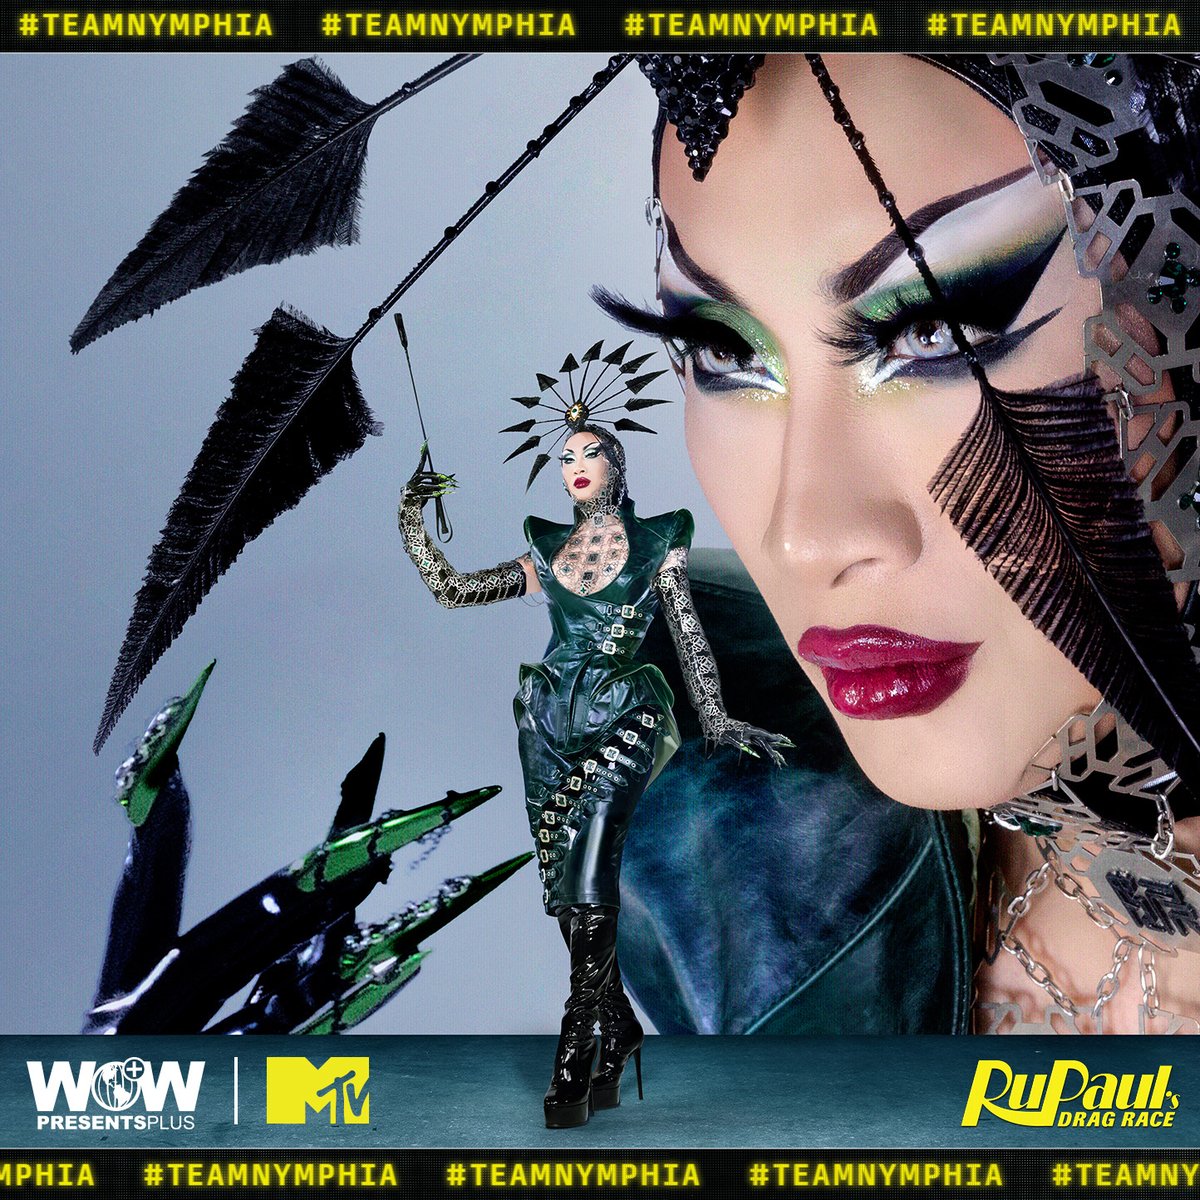 Are you #TeamNymphia? 👑 Let your voice be heard using the hashtag if you want @66wind99 to snatch the #DragRace crown! 🏁 Watch #DragRace on @wowpresentsplus (worldwide ex. USA, Canada, Australia) and @mtv (USA): bit.ly/4852FPy